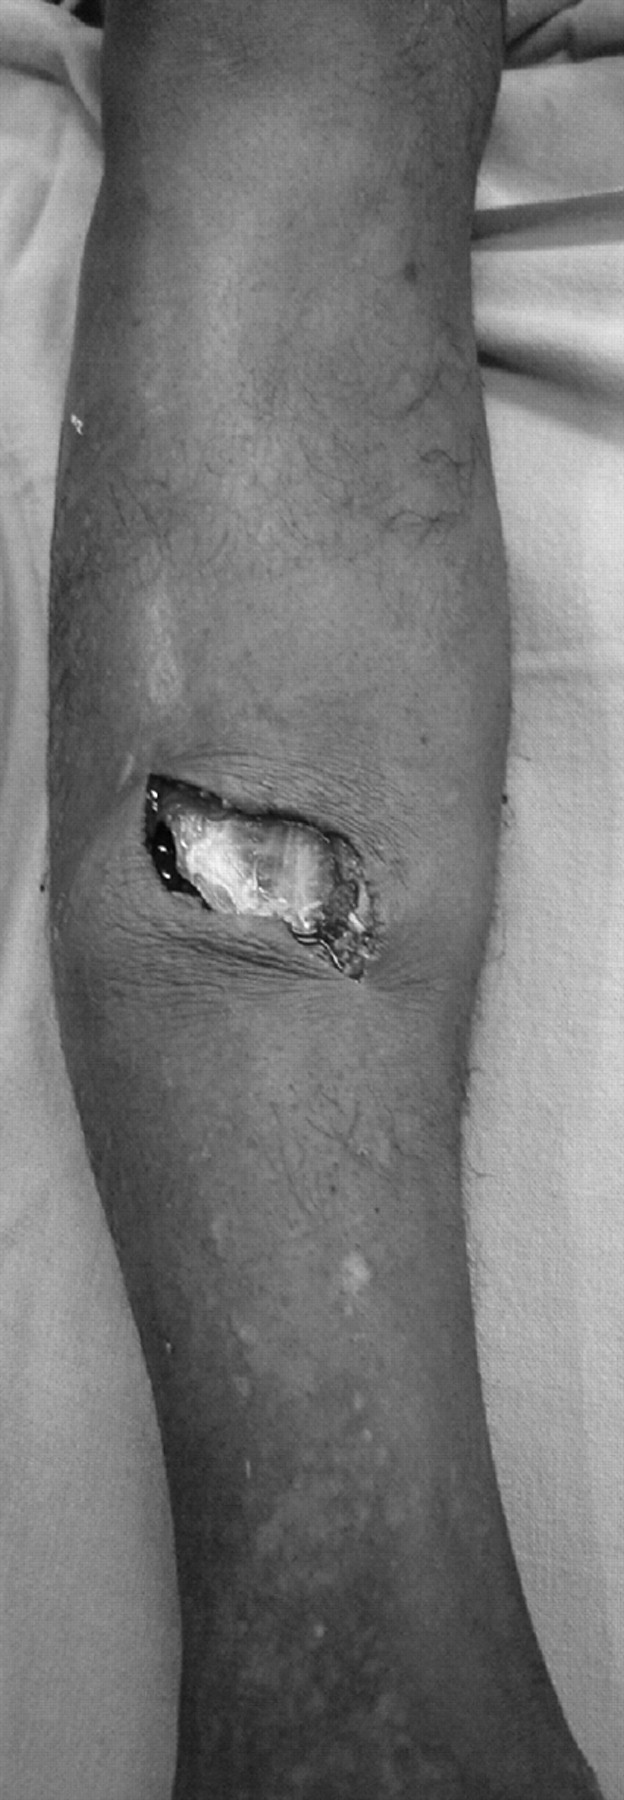 CRUSH INJURY FOOT, LOWER LIMB INJURIES AND LIMB SALVAGE: DEEP FRICTION BURNS  WITH SOFT TISSUE LOSS - DEBRIDEMENT AND SKIN GRAFTING 